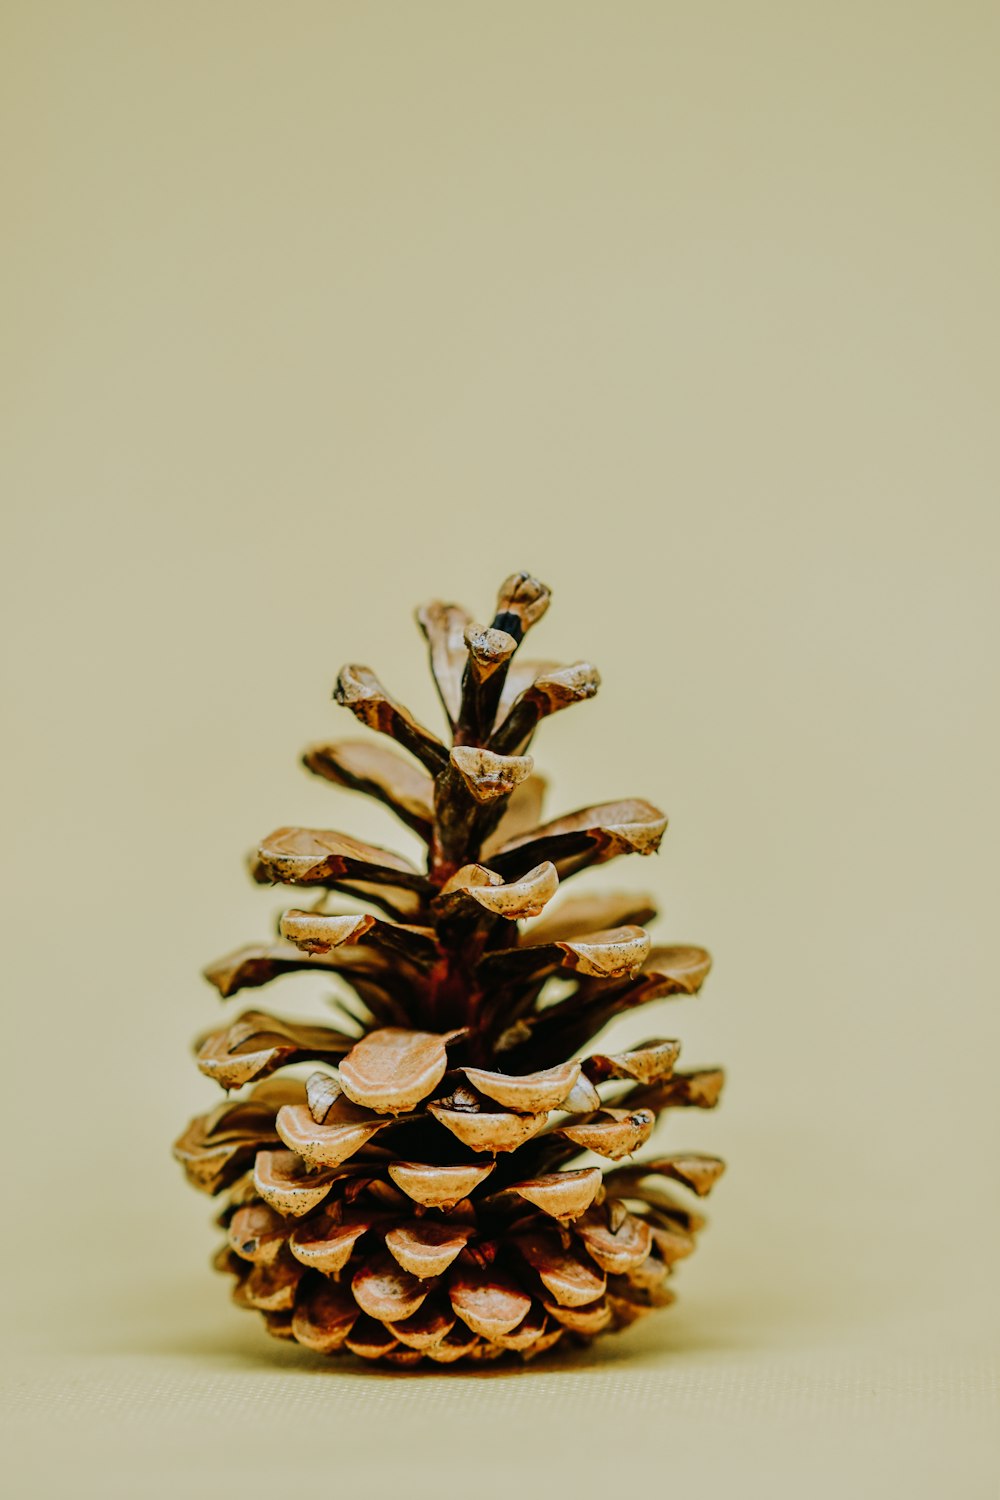 brown pine cone on white background